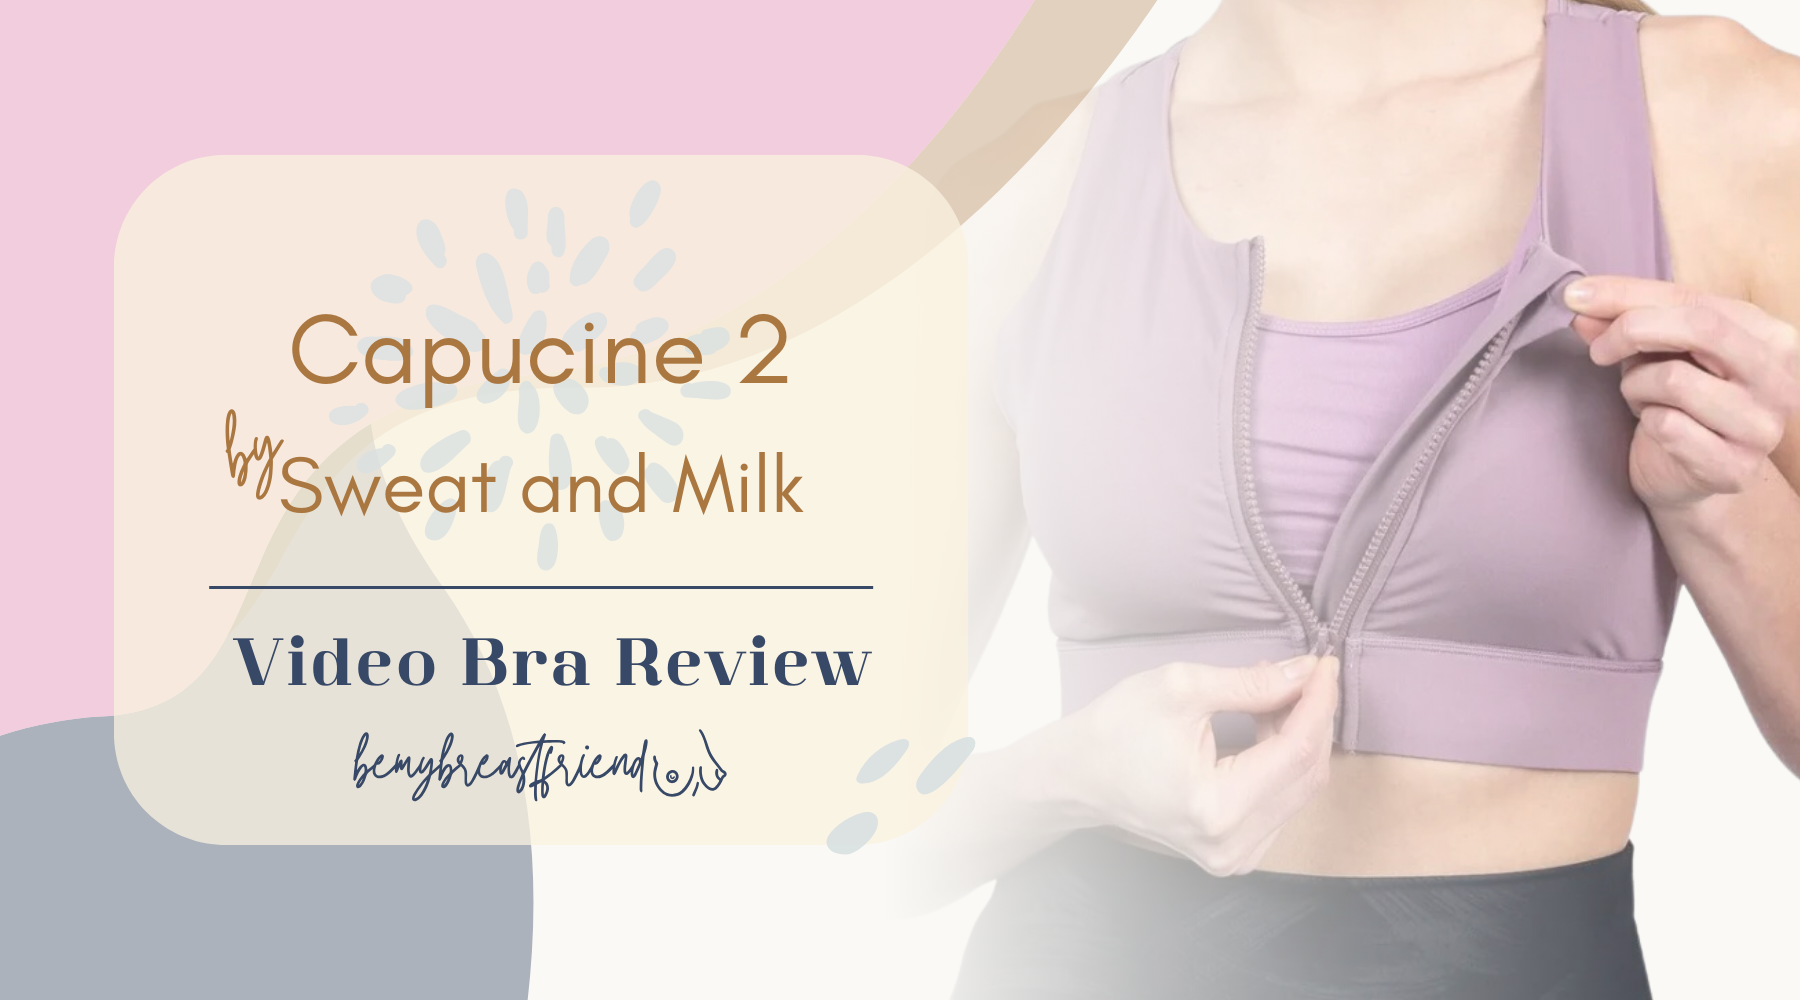 19 Nursing & Pumping Bra Review Capucine 2 by Sweat and Milk